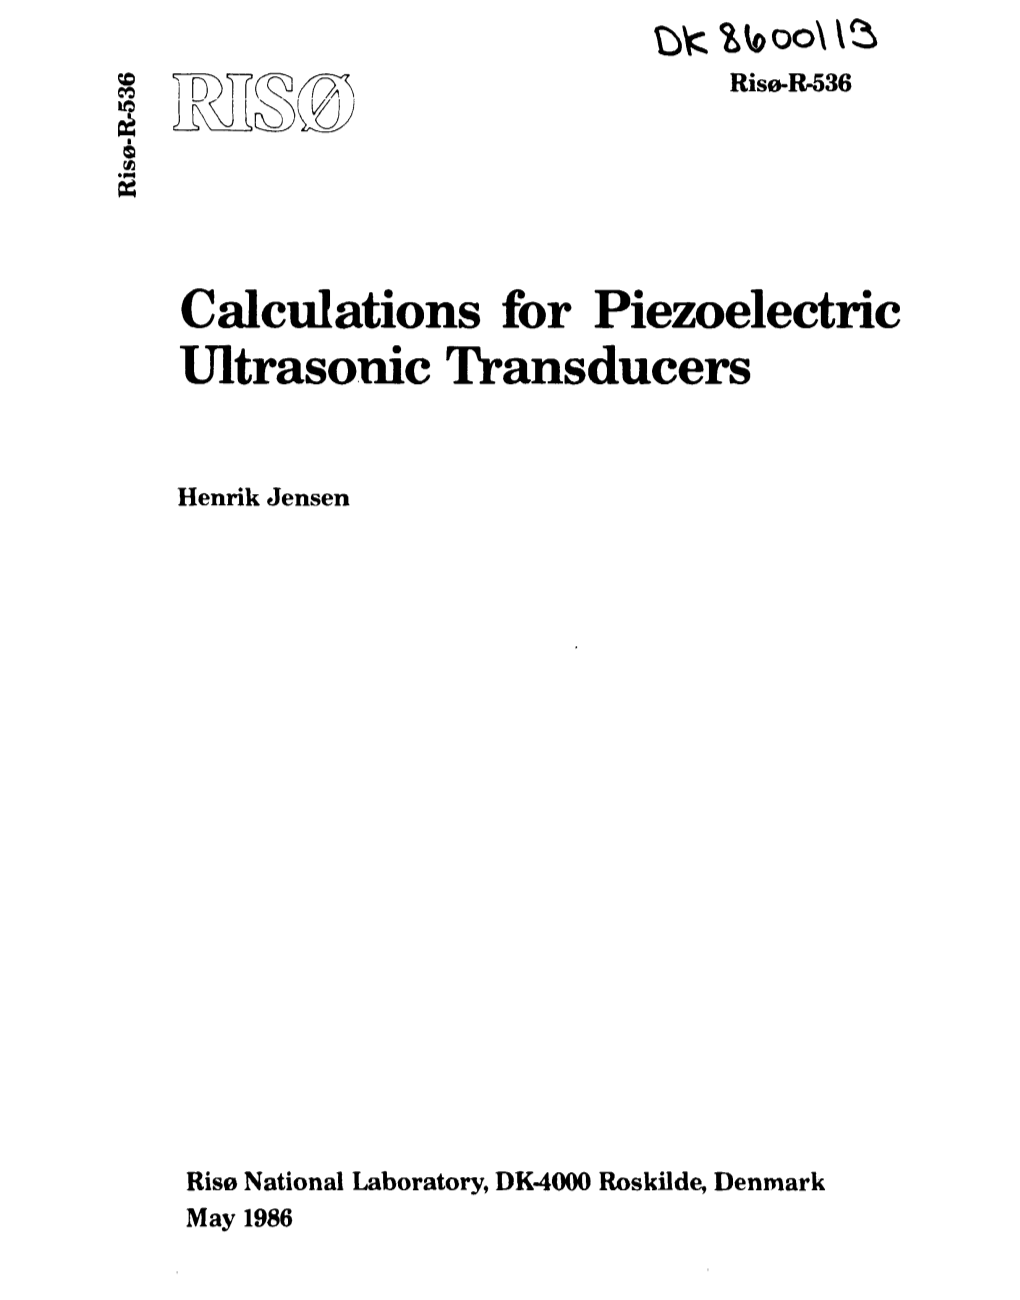 Calculations for Piezoelectric Ultrasonic Transducers